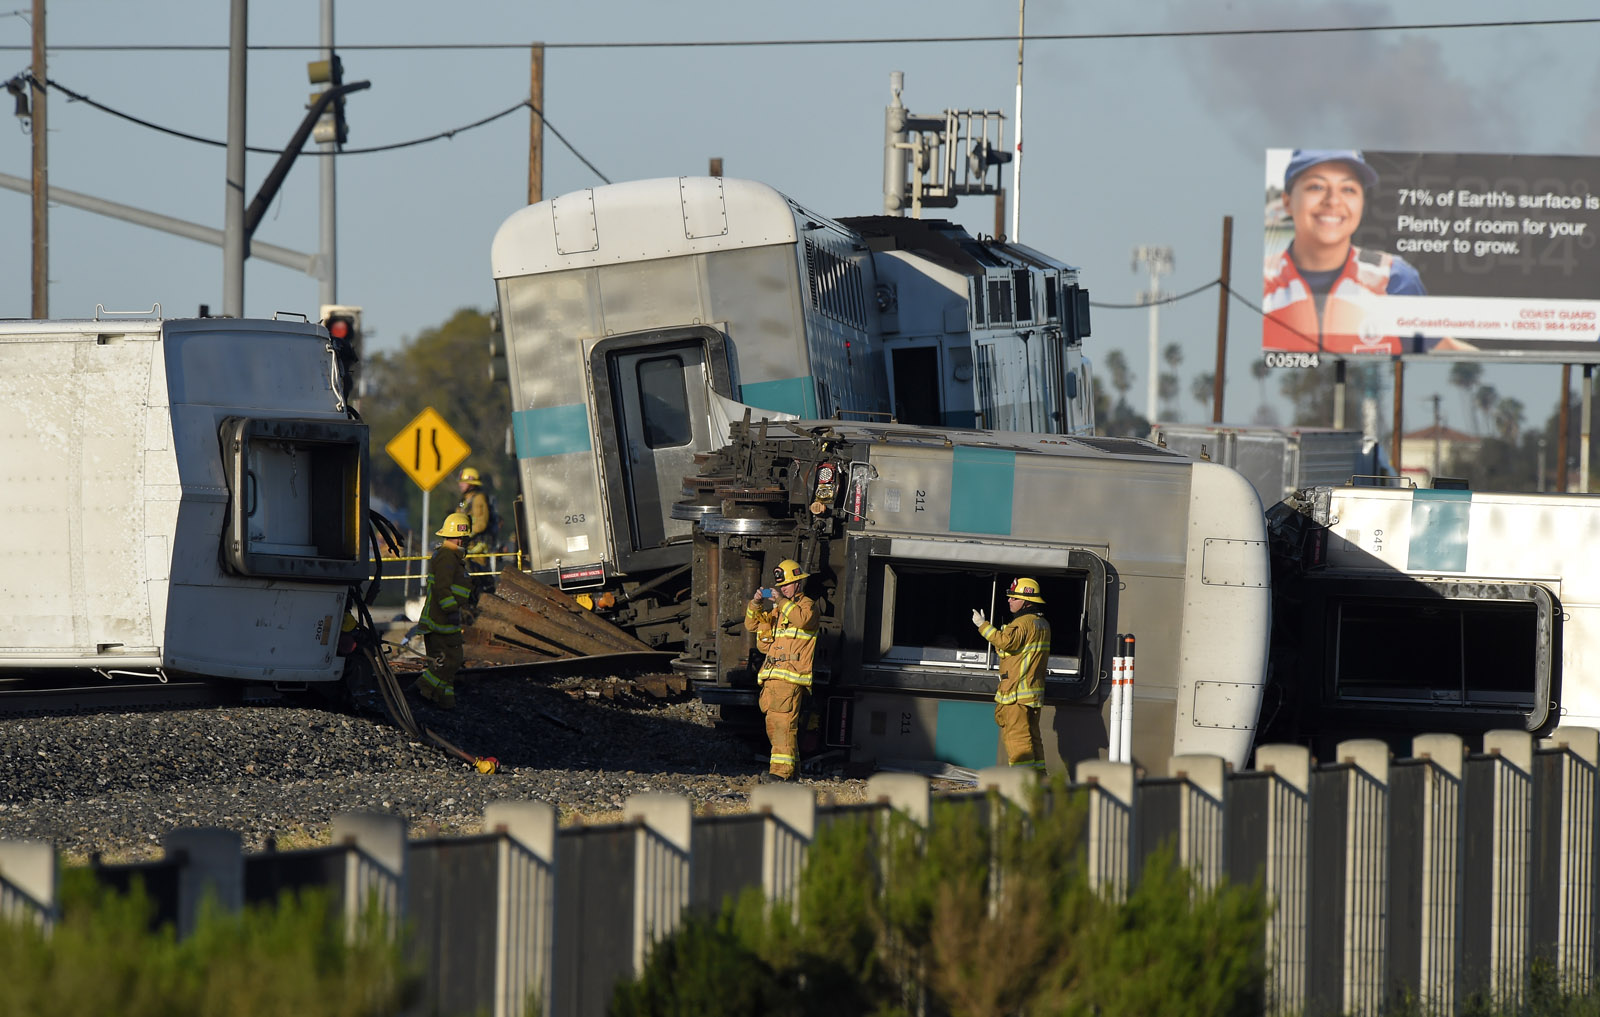 Firefighter stand in front of the wreck of a Metrolink passenger train that derailed, Tuesday, Feb. 24, 2015, in Oxnard, Calif. Three cars of the Metrolink train tumbled onto their sides, injuring dozens of people in agricultural country 65 miles northwest of Los Angeles. Metrolink spokesman Scott Johnson told the Los Angeles Times that at least 30 people were injured. (AP Photo/Mark J. Terrill)